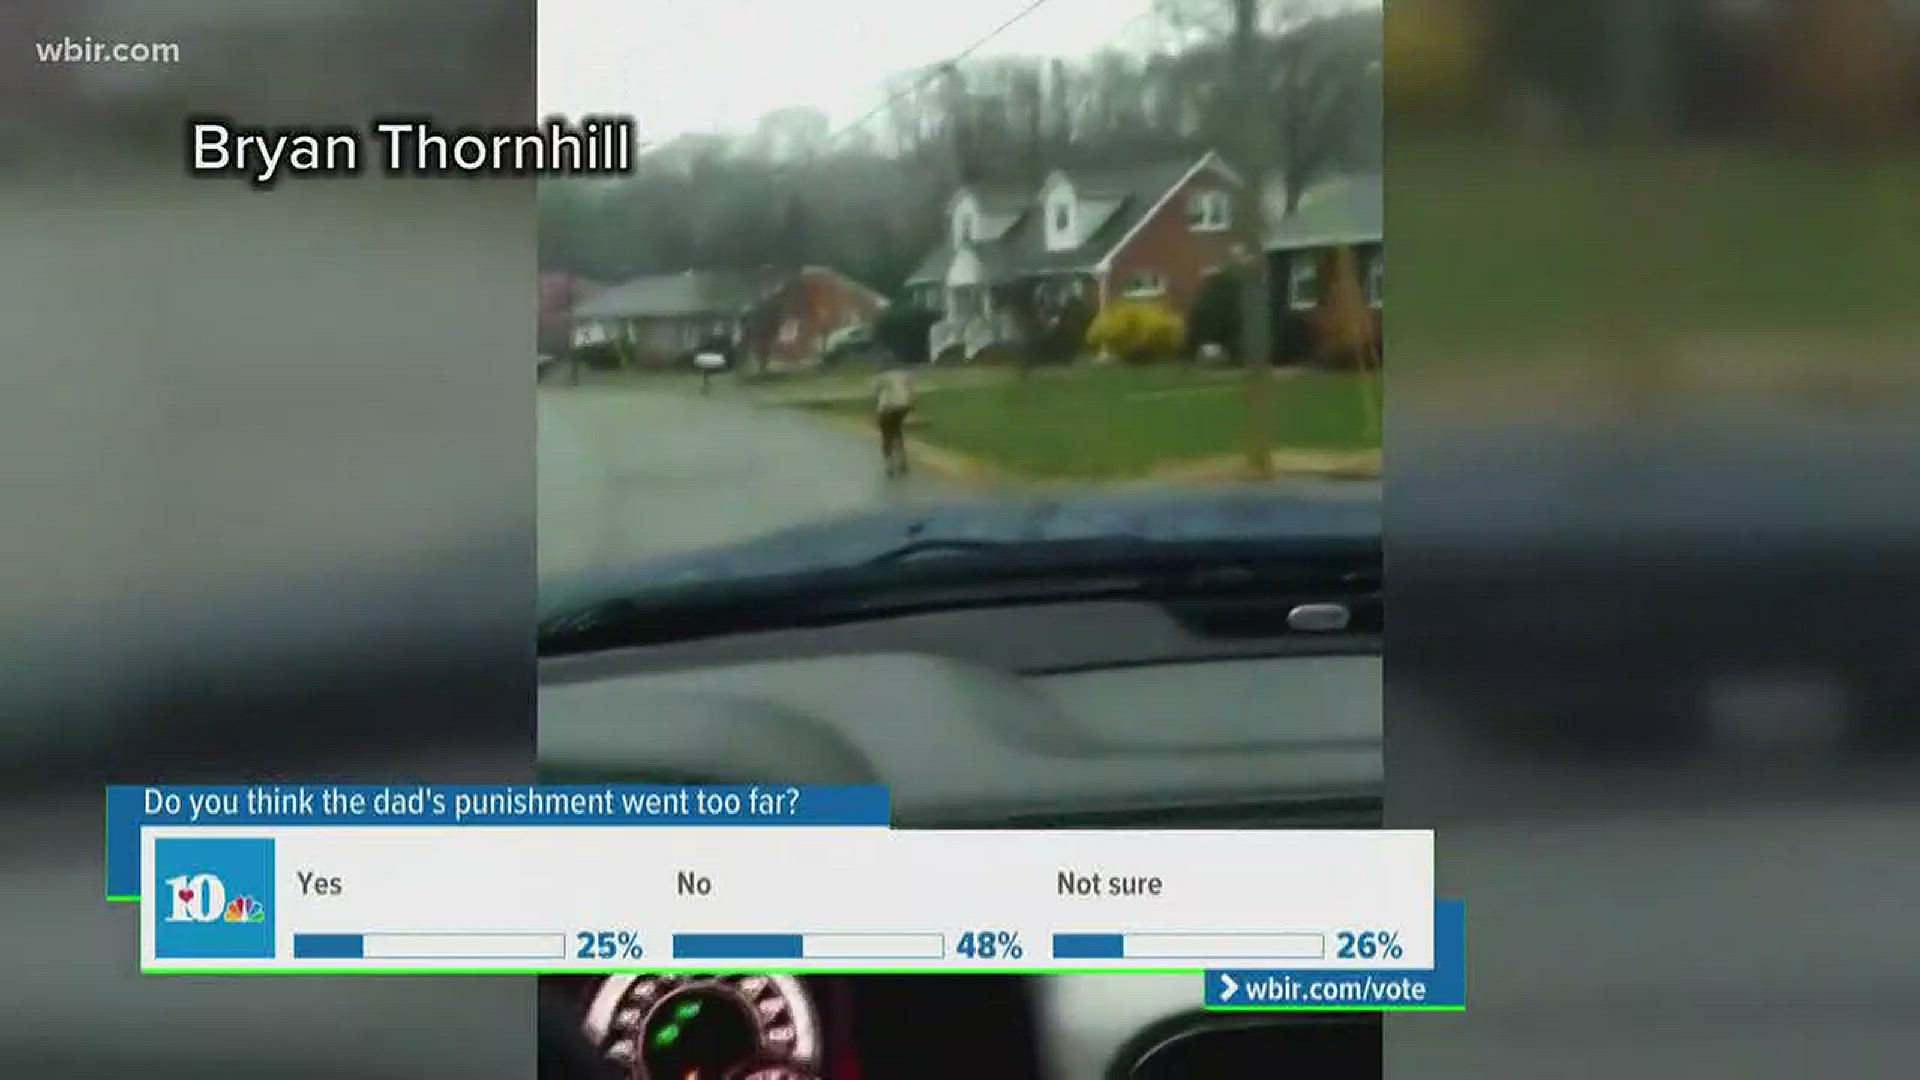 March 6, 2018: Every parent disciplines their kids differently, but one dad's punishment is going viral after he forced his 10-year-old son to run to school in the rain after he was kicked off the bus for bullying another student.